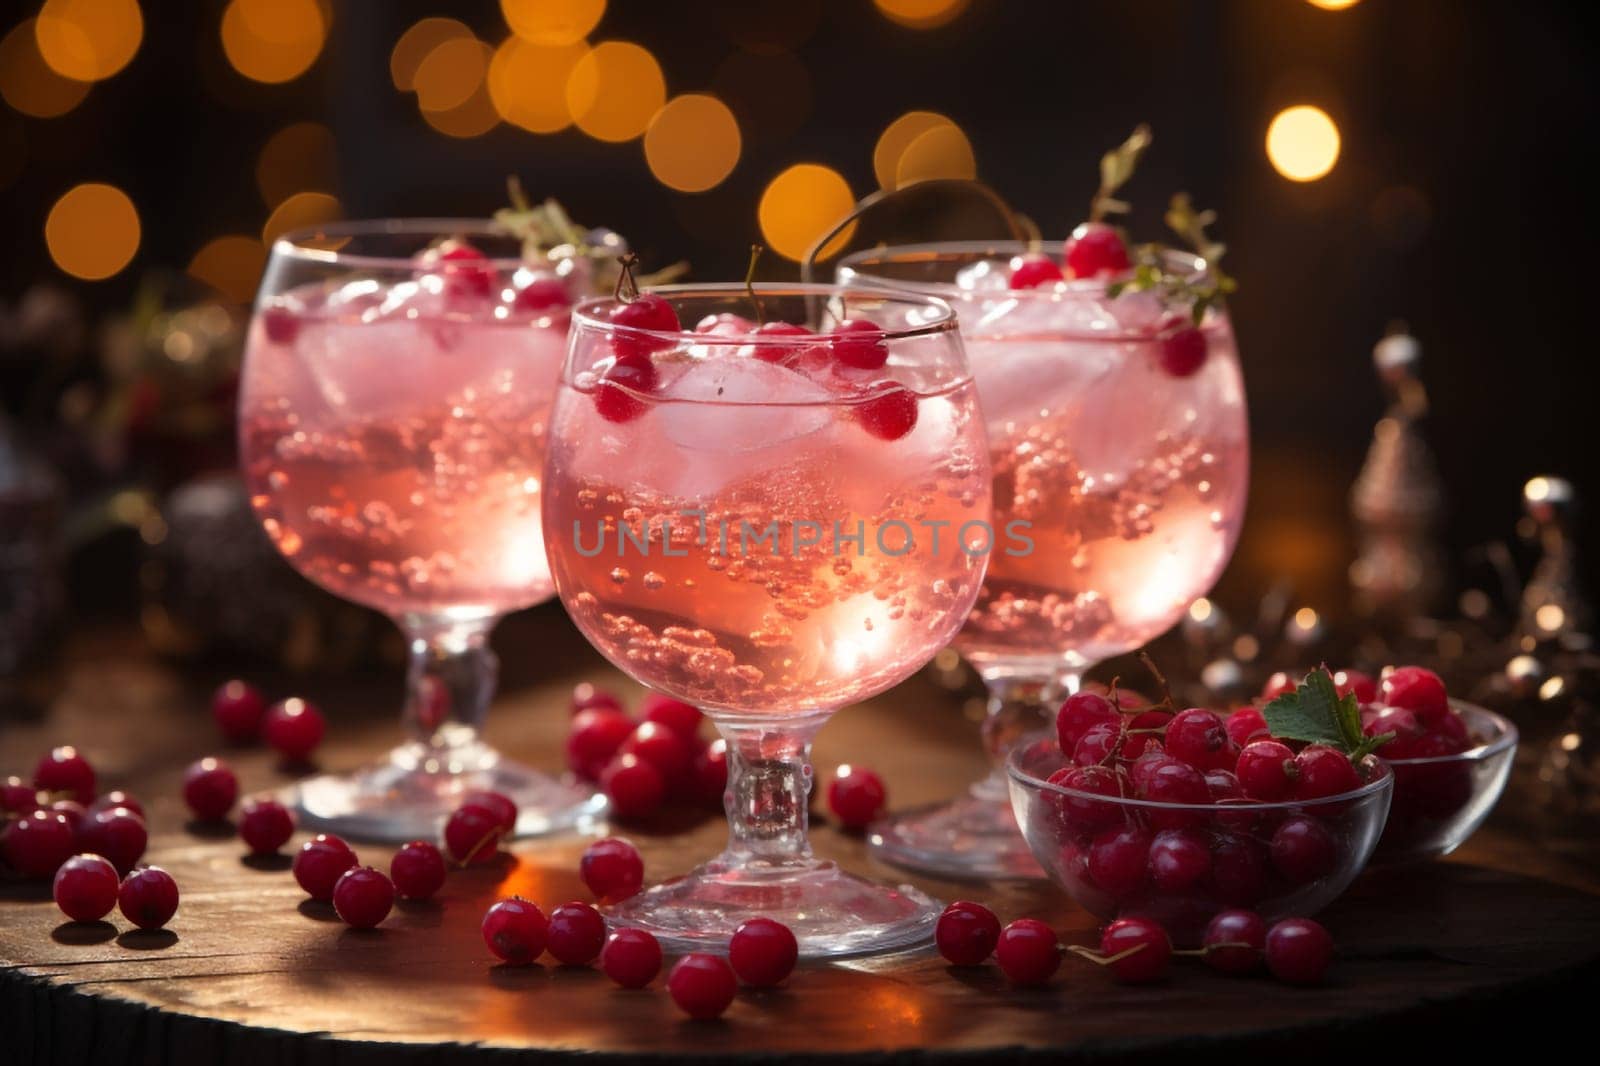 Winter Wonderland Punch is an alcoholic cocktail made with champagne, white wine, cranberry juice, and frozen berries. It is a festive and refreshing drink, perfect for winter holidays.